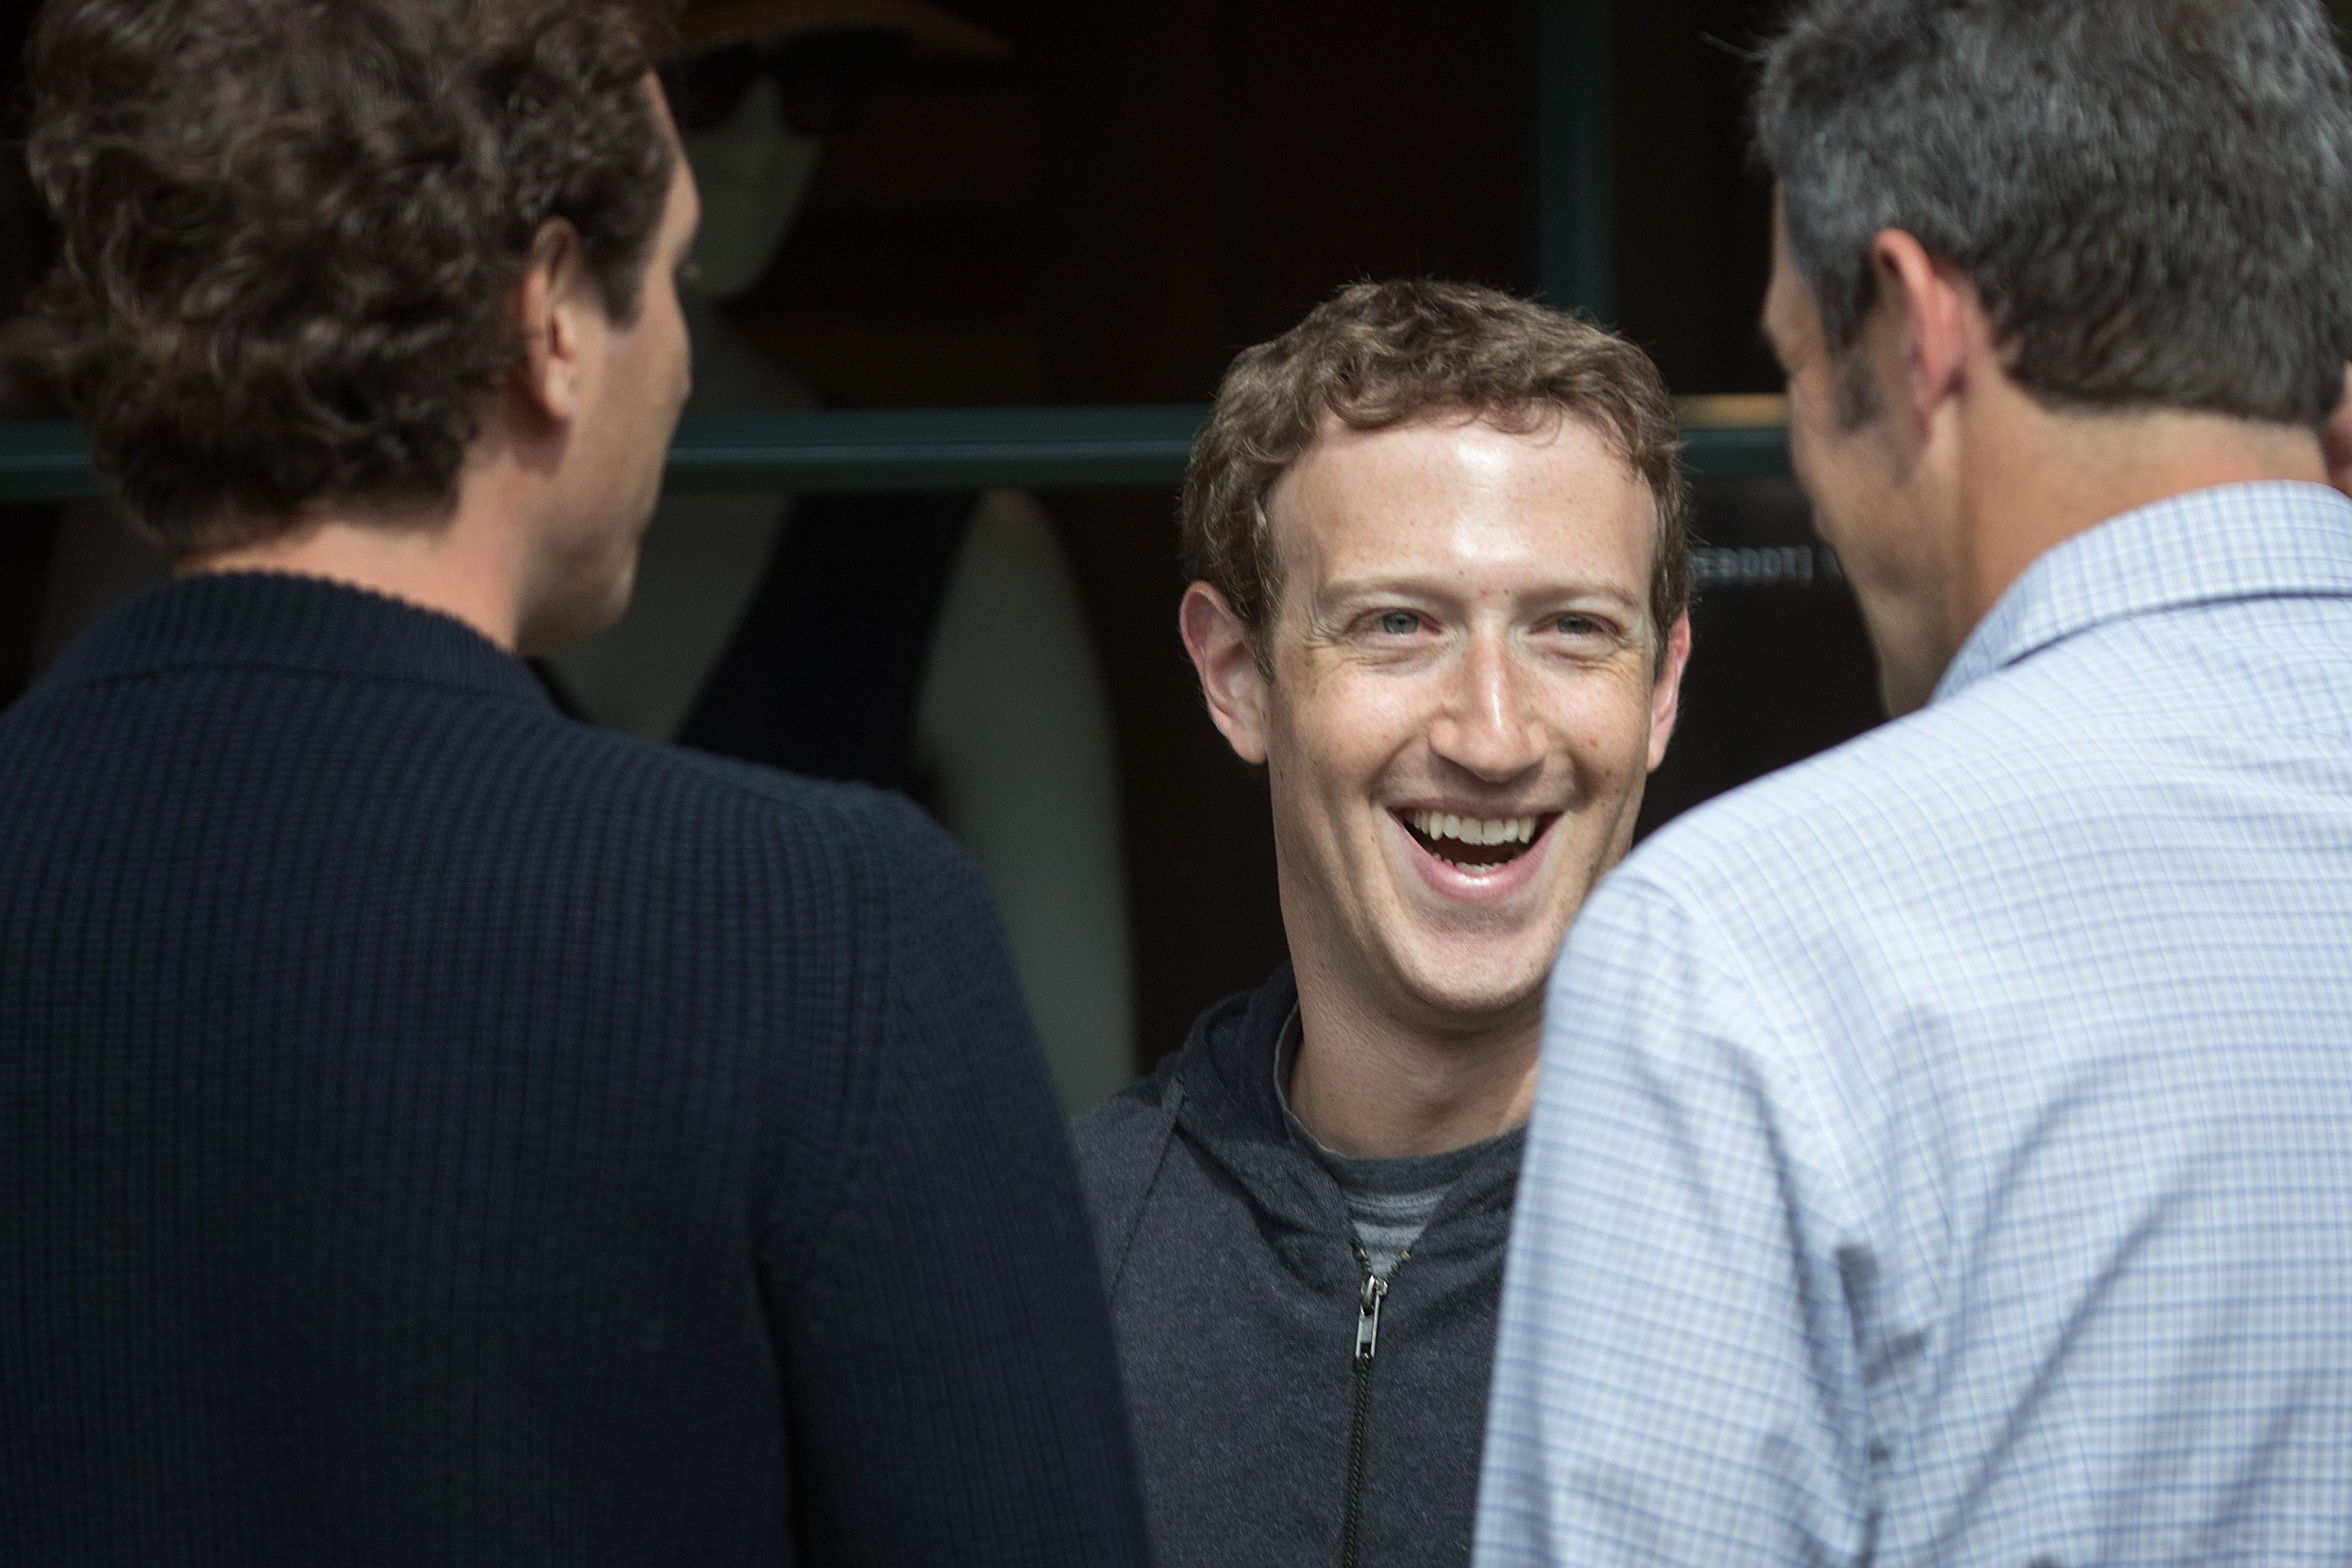 This Is Why You Didn't See A Photo Of Mark Zuckerberg At Court This